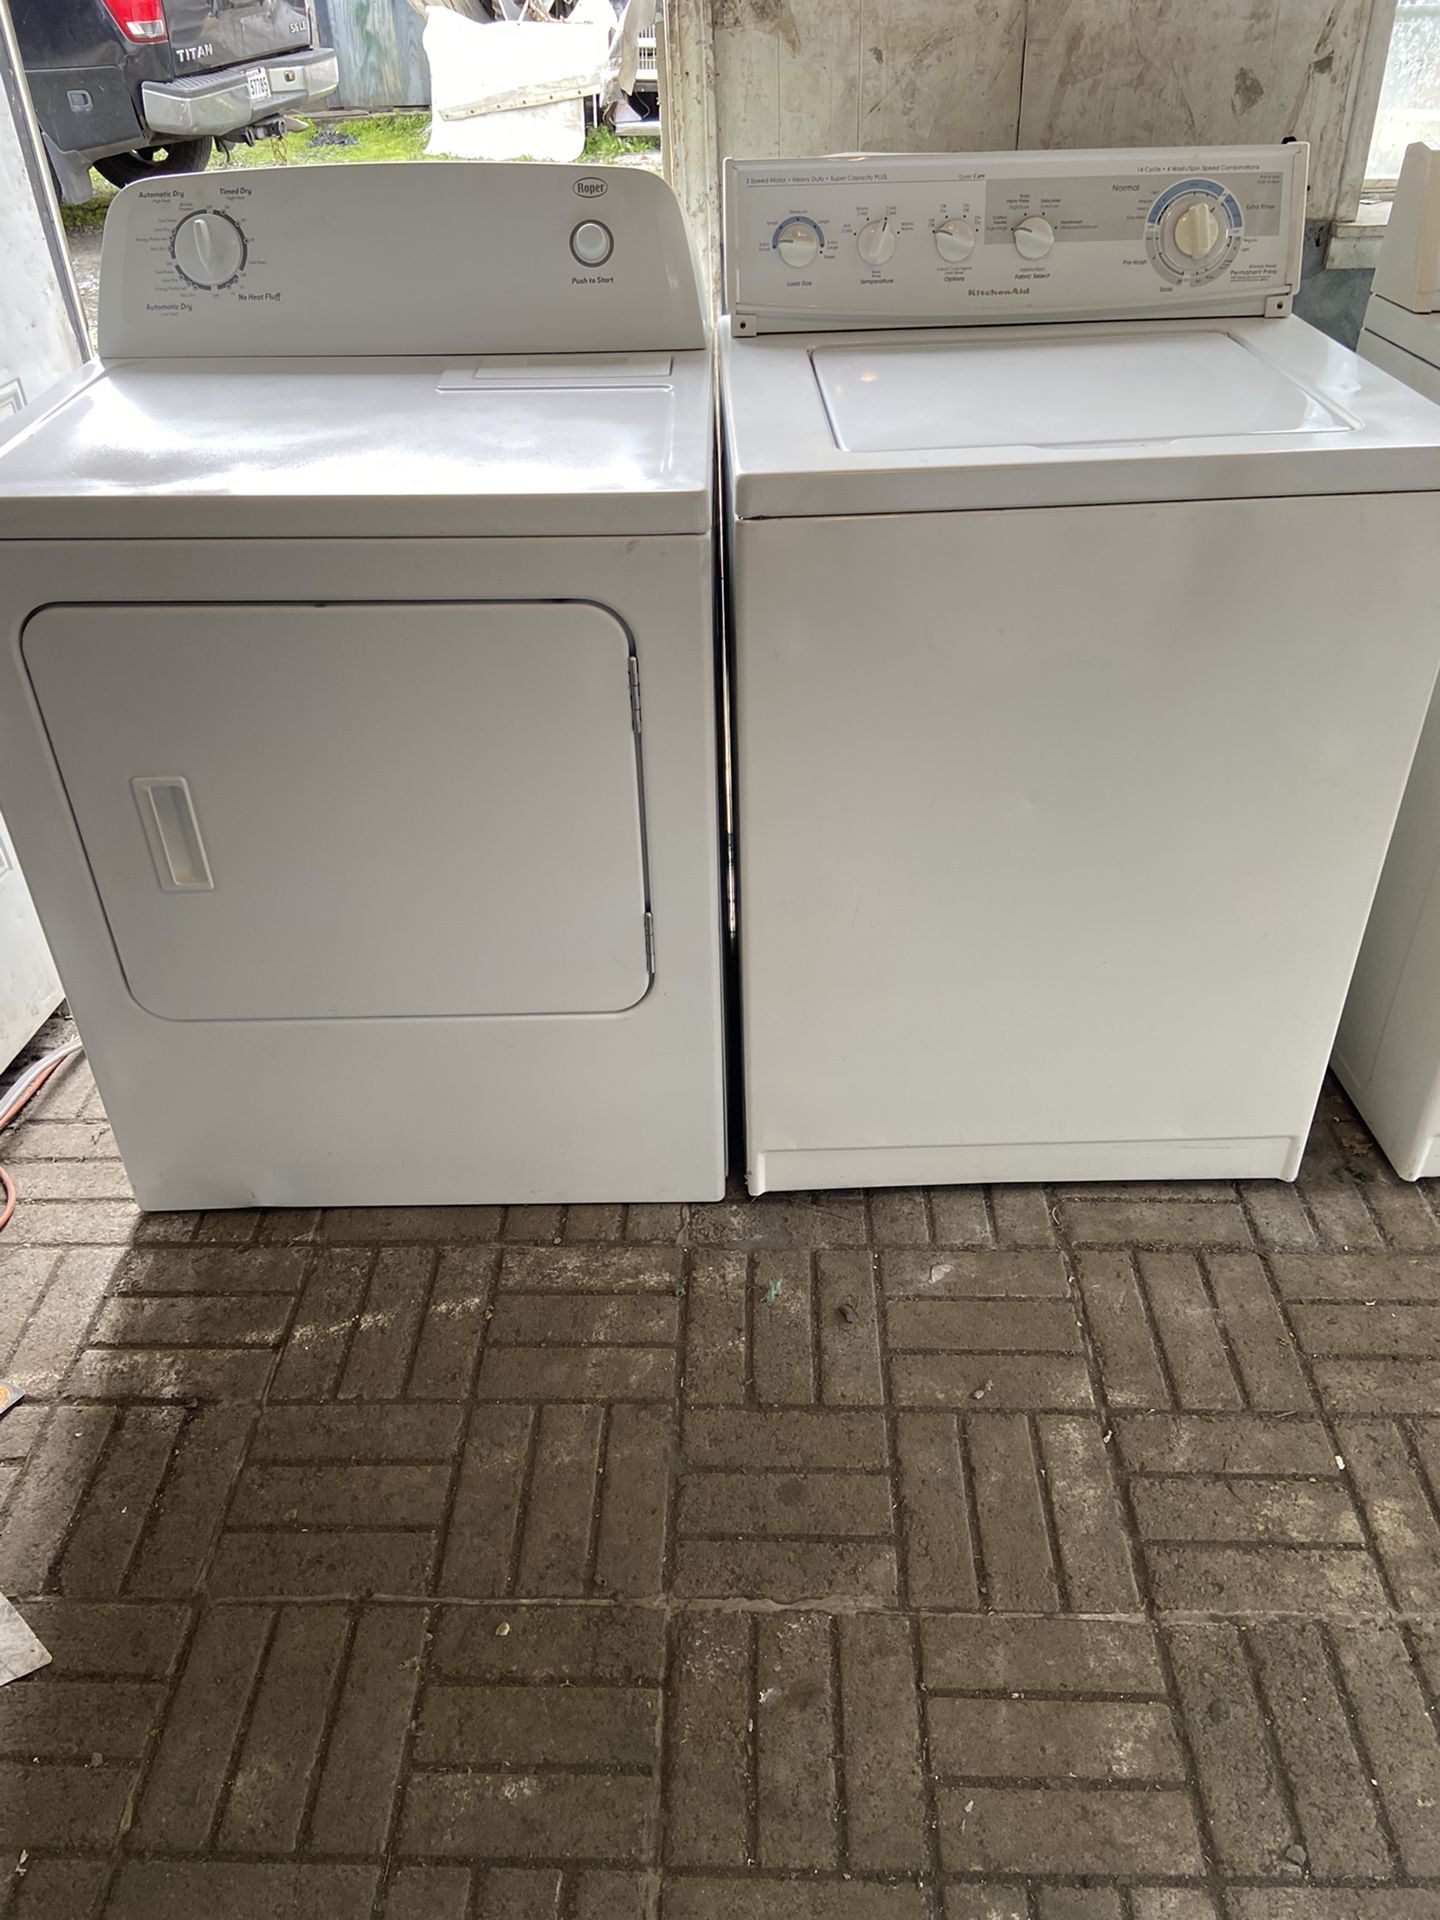 SUPER CAPACITY PLUS WASHER & ELECTRIC DRYER SET! BOTH RUN LIKE NEW! ALL MODES WORK ON BOTH! BOTH HAS BEEN CLEANED IN & OUTSIDE!WHIRLPOOL ROPER  DRYER 